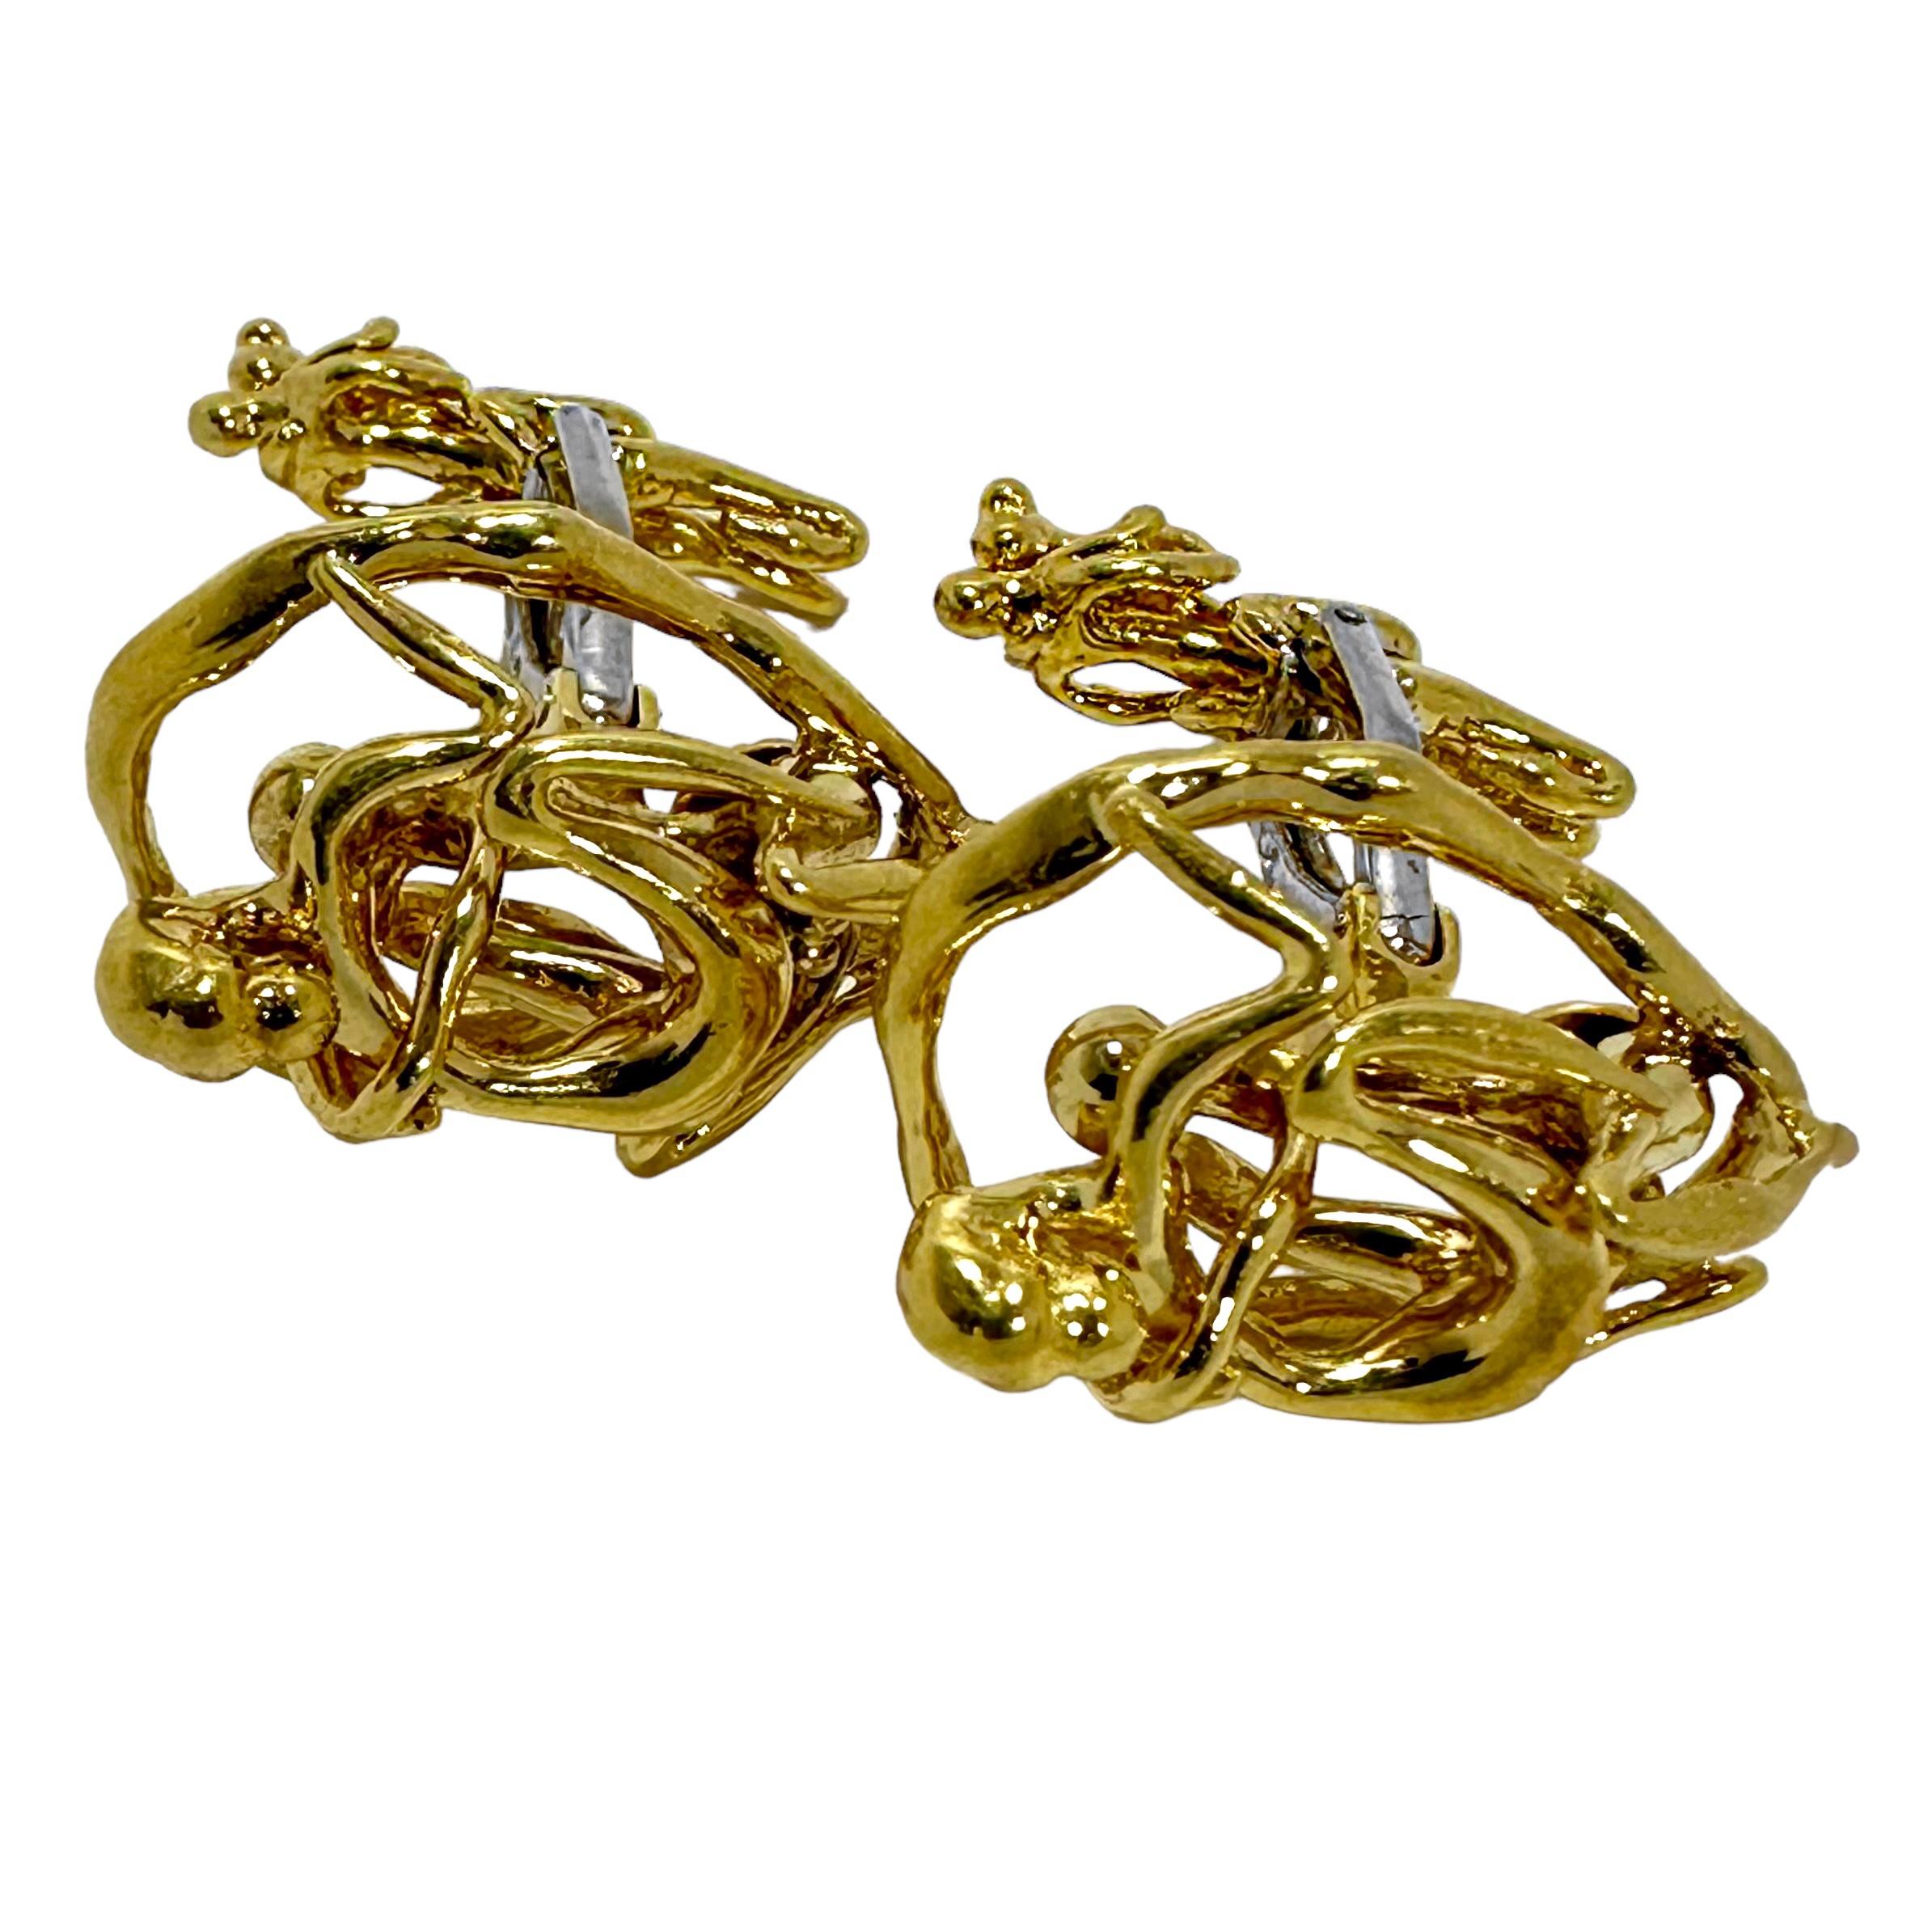 Mid-20th Century French 18k Yellow Gold Artisan Hand Crafted Erotic Cuff Links In Good Condition For Sale In Palm Beach, FL